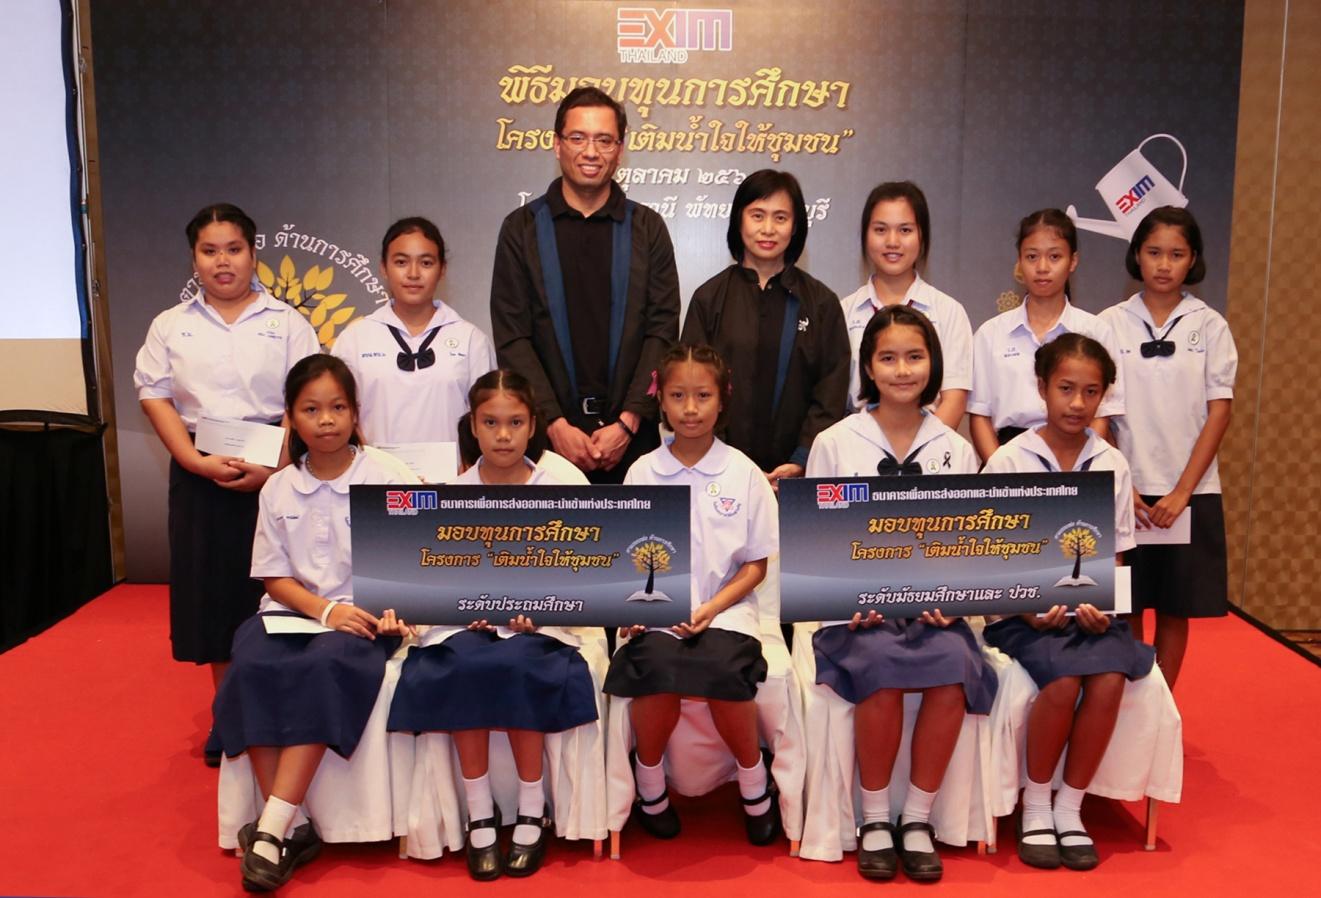 EXIM Thailand Gives Scholarships under “Caring for the Community” Scheme in the East